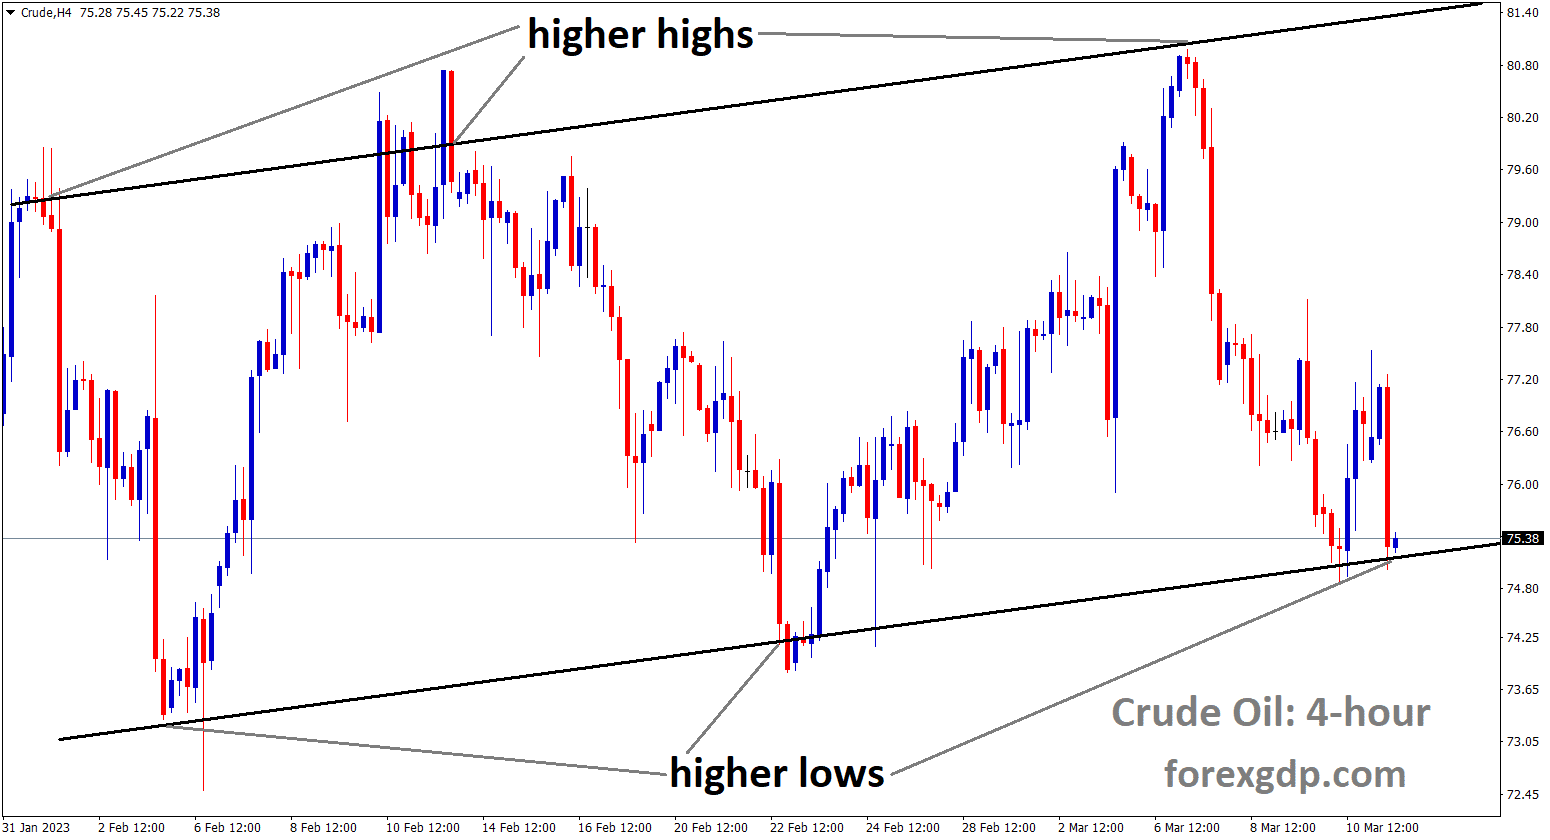 Crude Oil is moving an Ascending channel and the market has reached the higher low area of the channel.